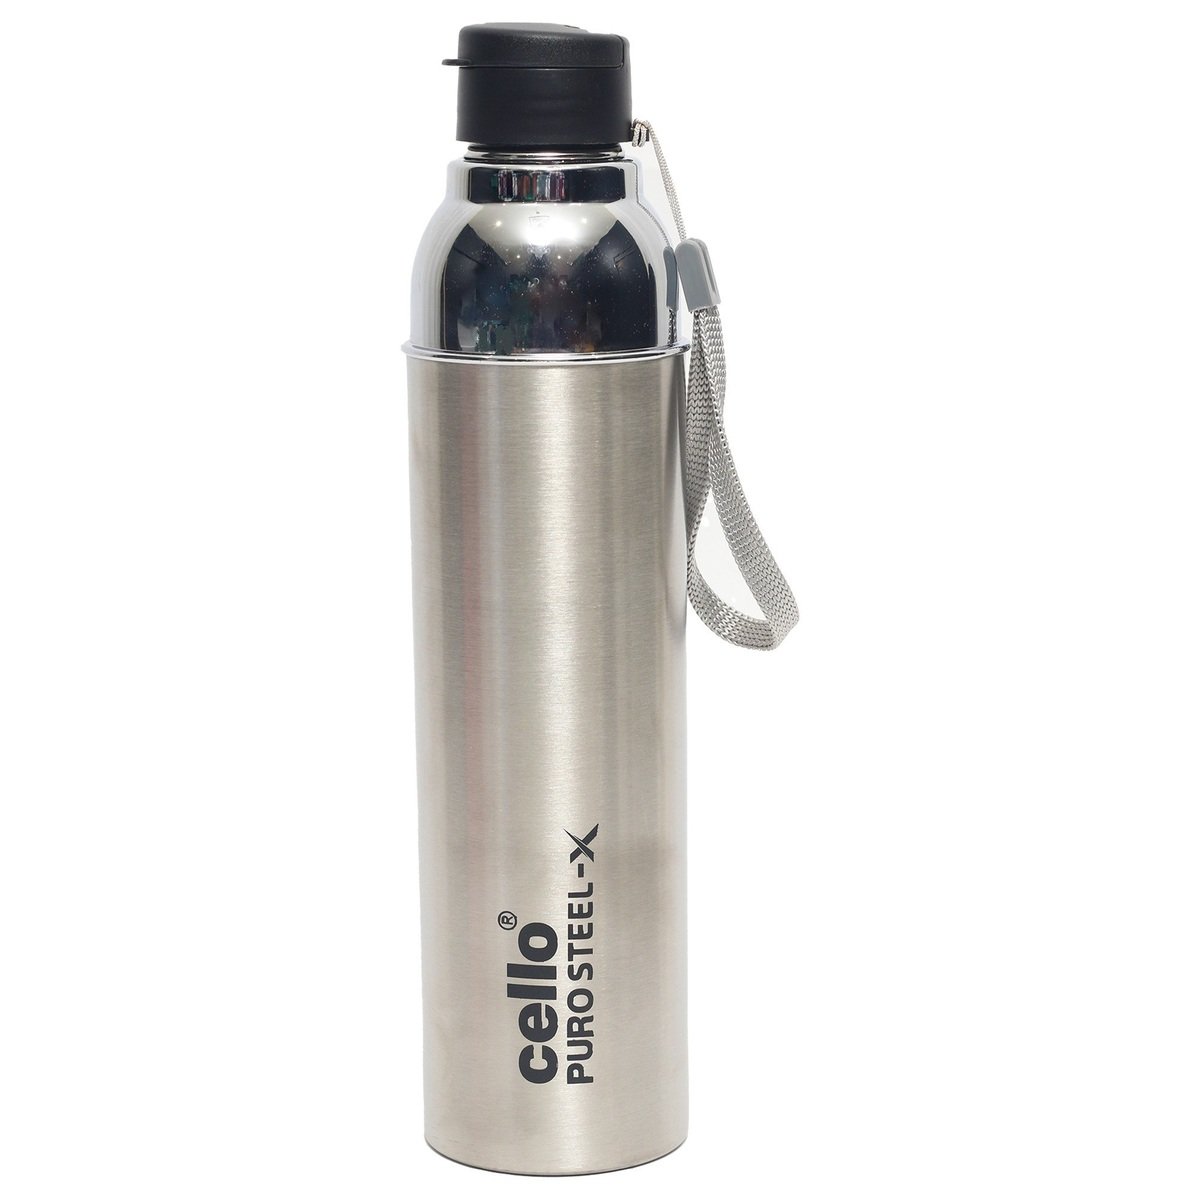 Cello Stainless Steel Water Bottle Puro Steel-X Polo 600ml